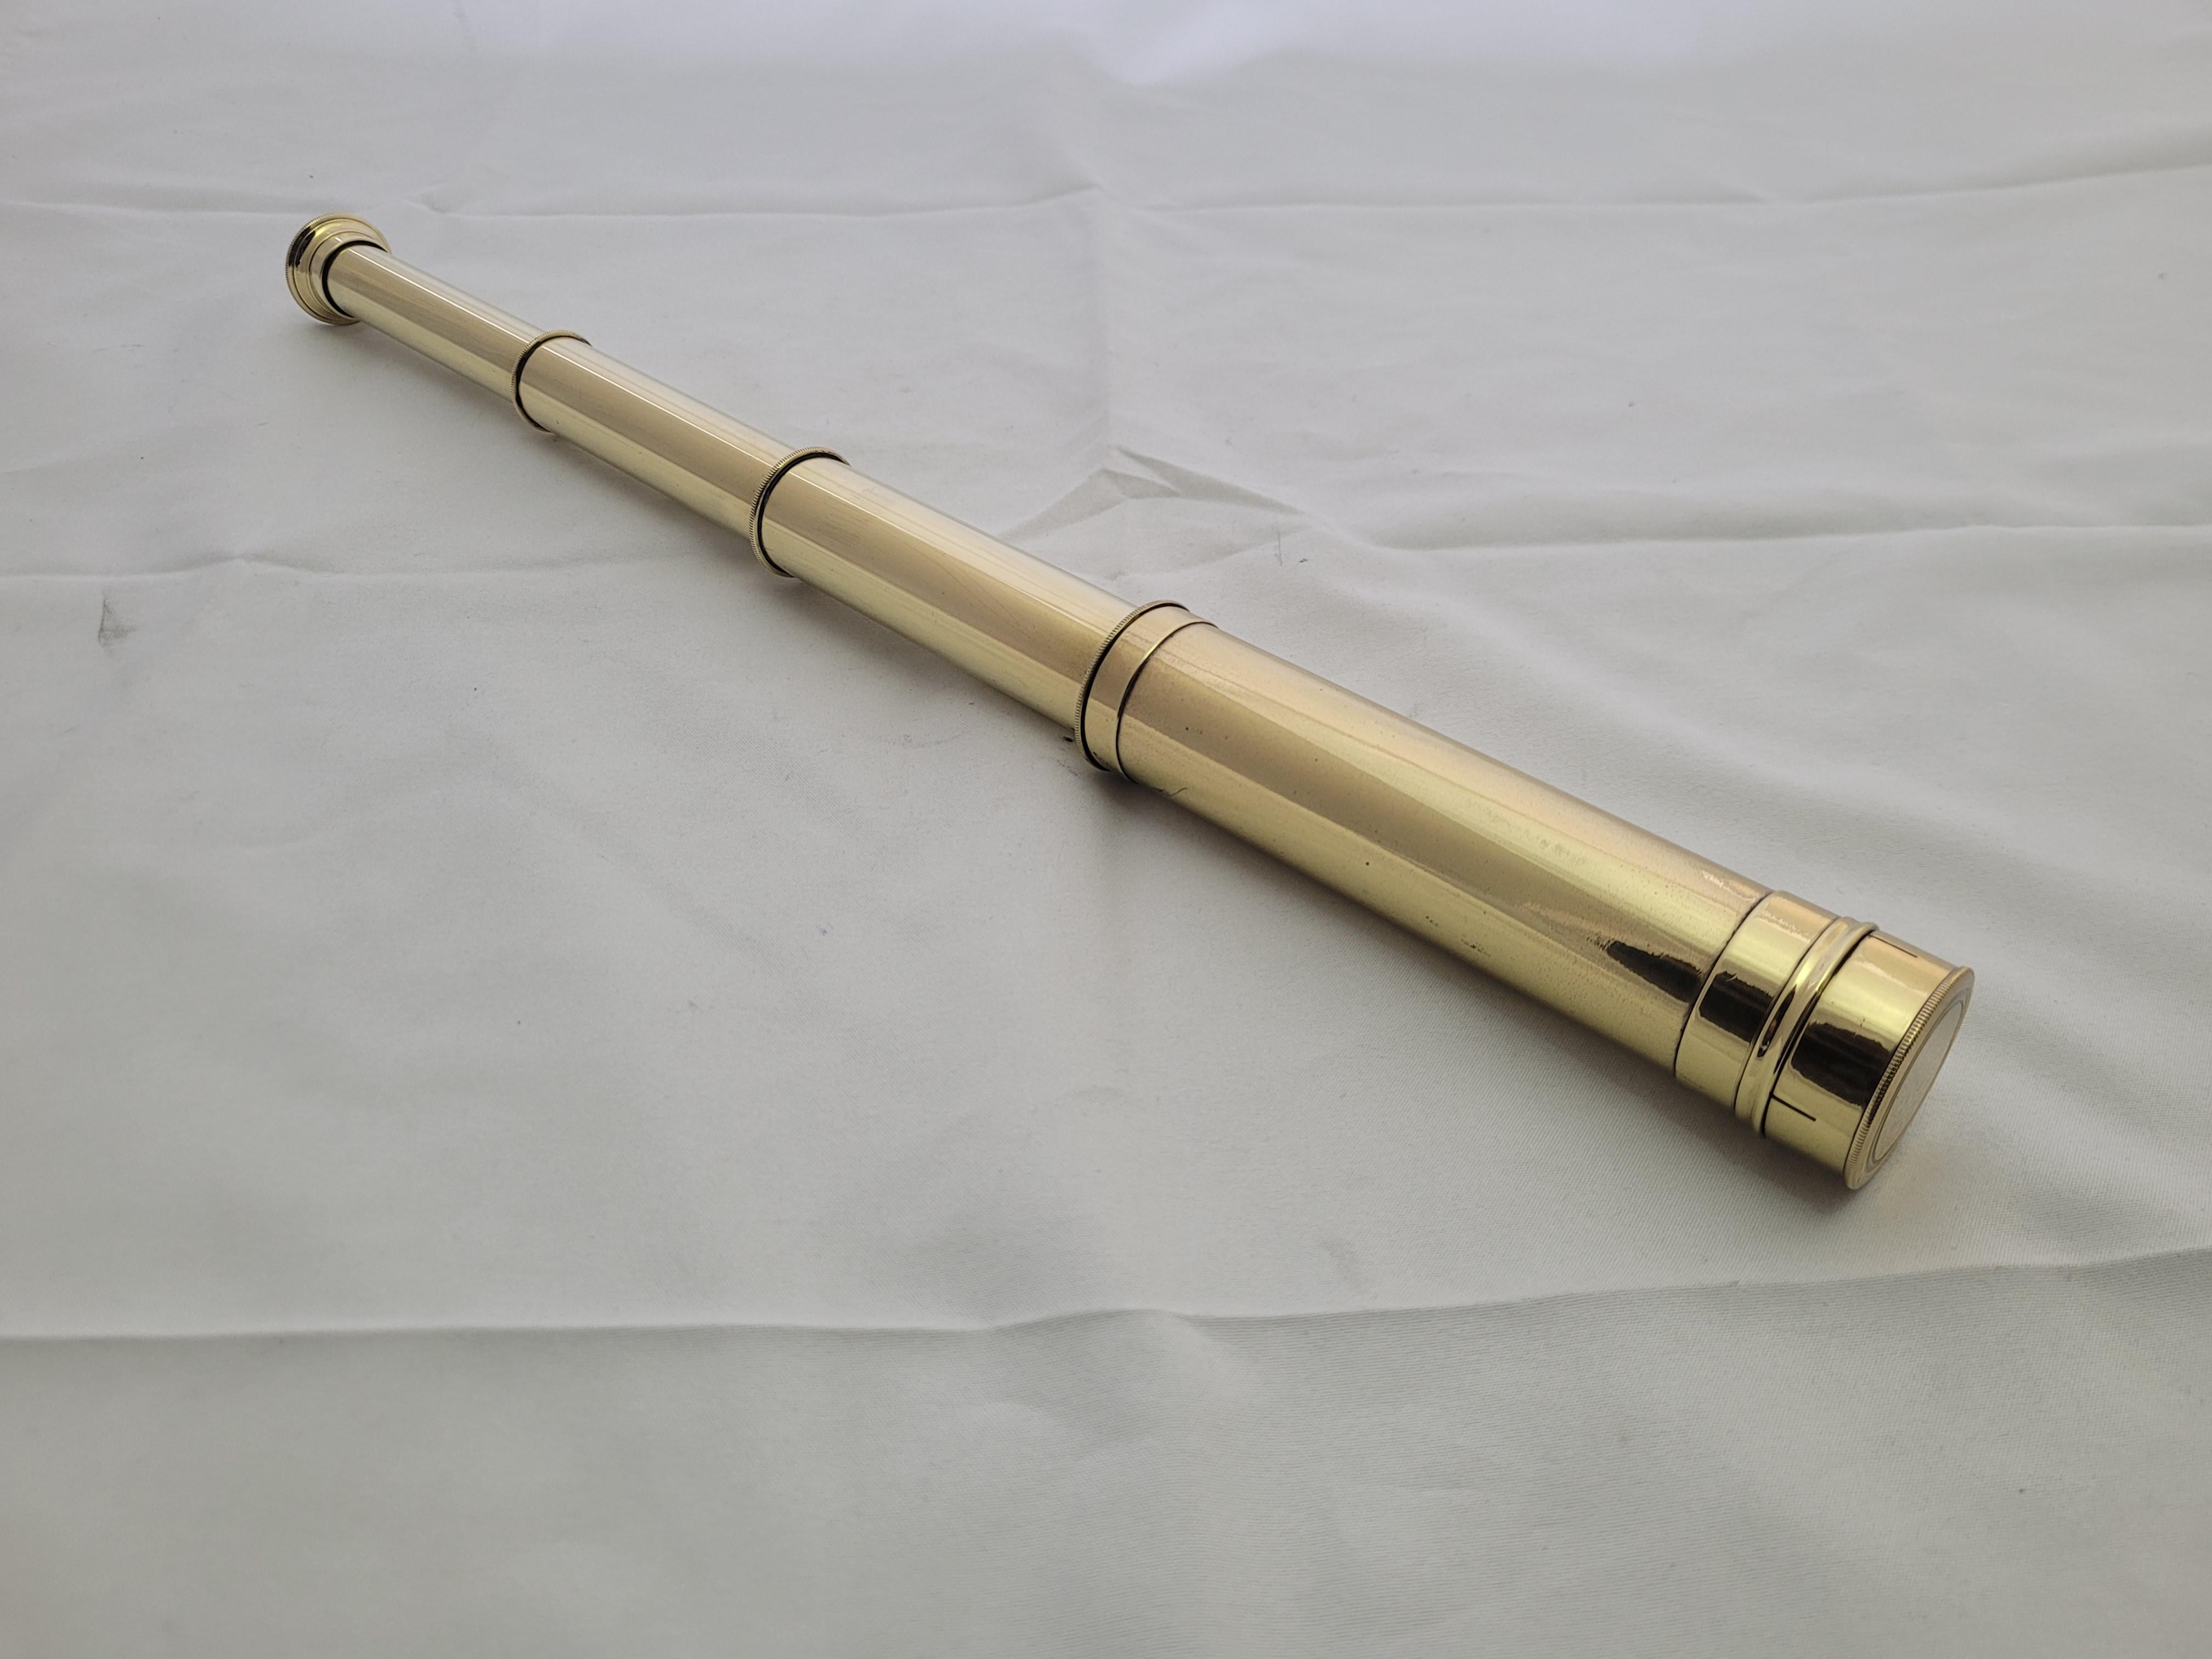 Antique mariners telescope of solid brass that has been polished and the main barrel, eyepiece and cap have been lacquered. The scope has a three draw barrel with eyepiece. Circa 1920. 

Weight: 1 lb.
Overall Dimensions: 16